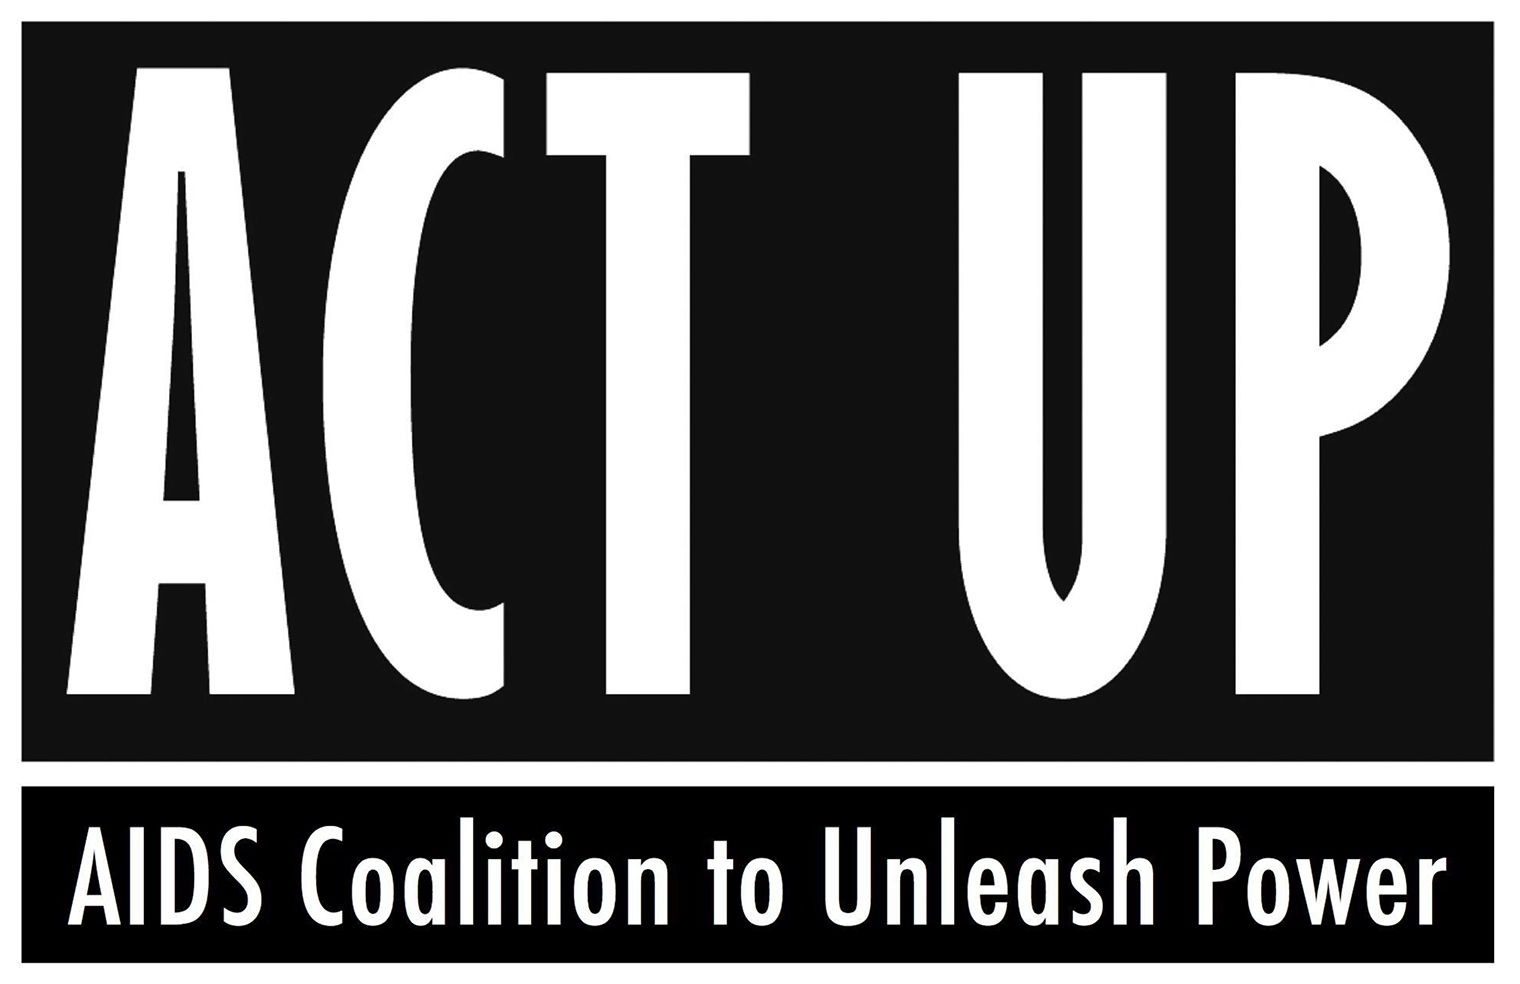 ACT UP logo with the words ACT UP in large caps and below a subtitle saying AIDS coalition to Unleash Power. The lettering is done in white against black with a white border separating the lower title from the subtitle below. 